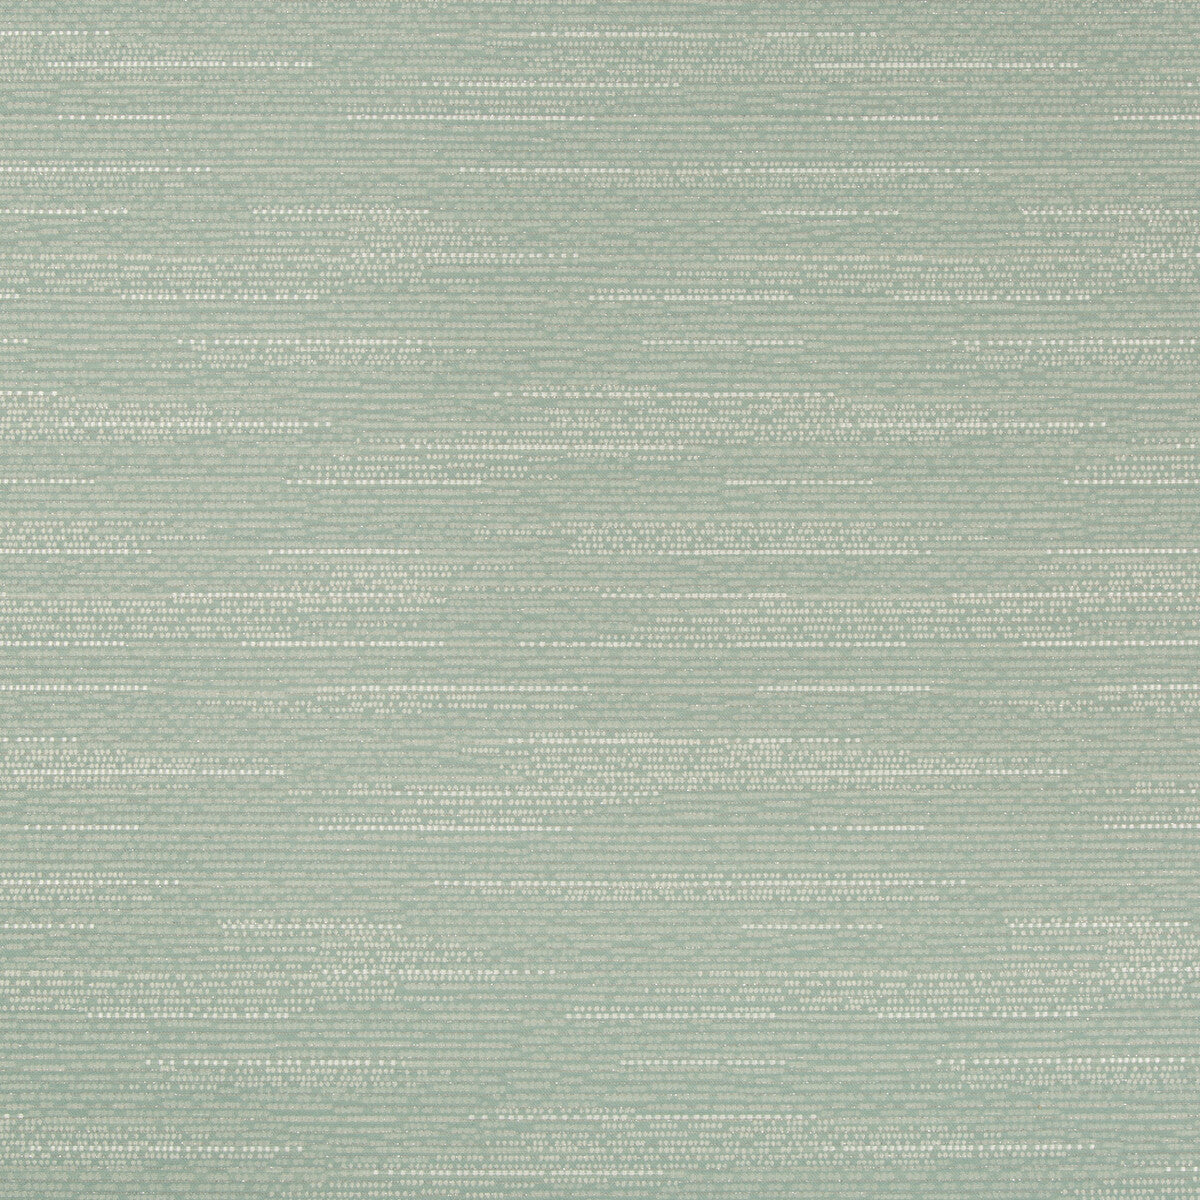 Waterline fabric in sea green color - pattern 32934.135.0 - by Kravet Contract in the Gis Crypton collection